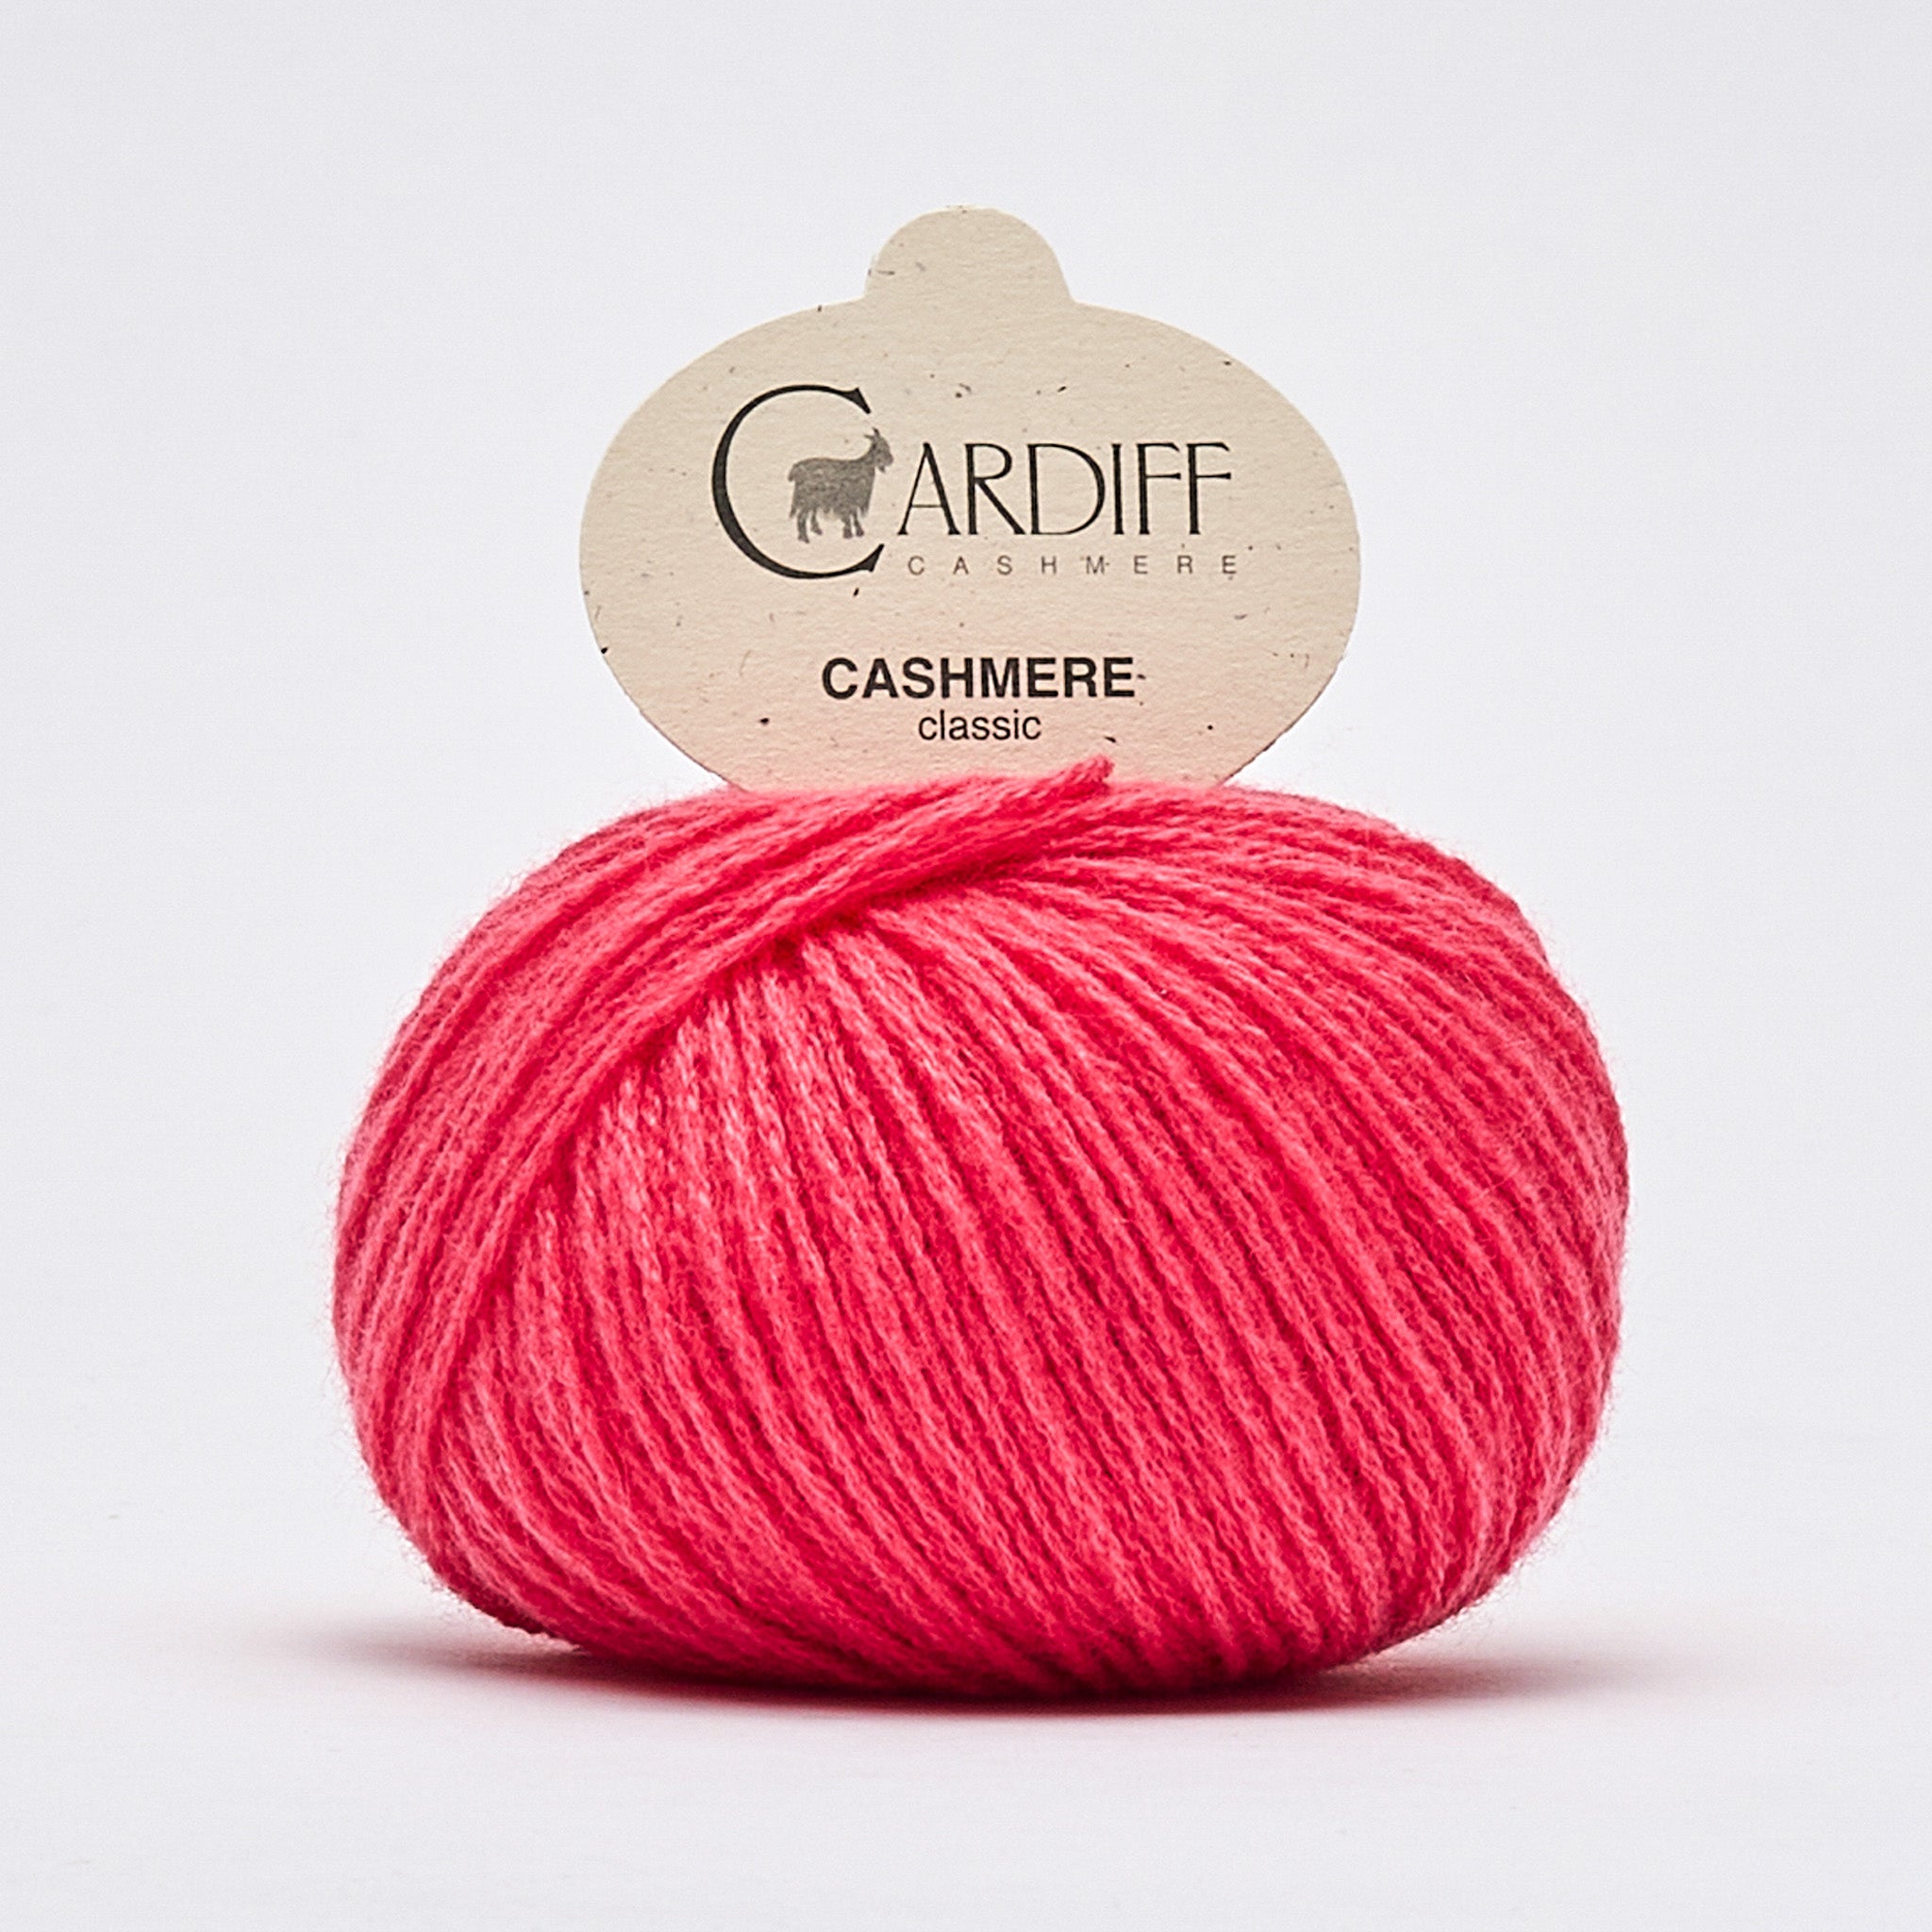 Cardiff Cashmere Classic rosemary [723]